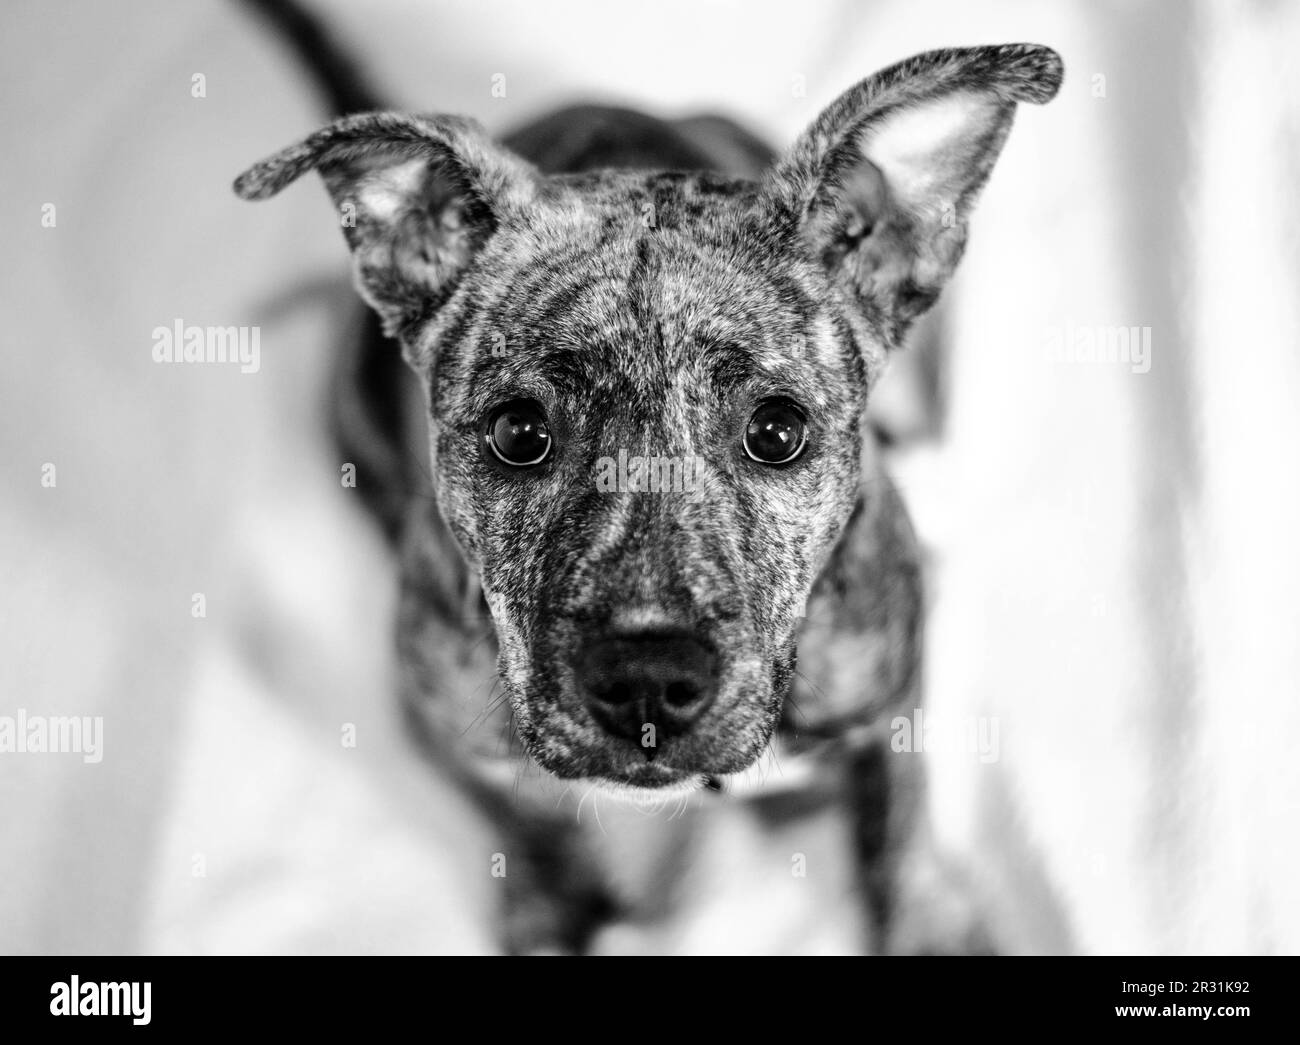 Brindle American Pitt Bull Terrier puppy looking up at the camera, black and white. Stock Photo